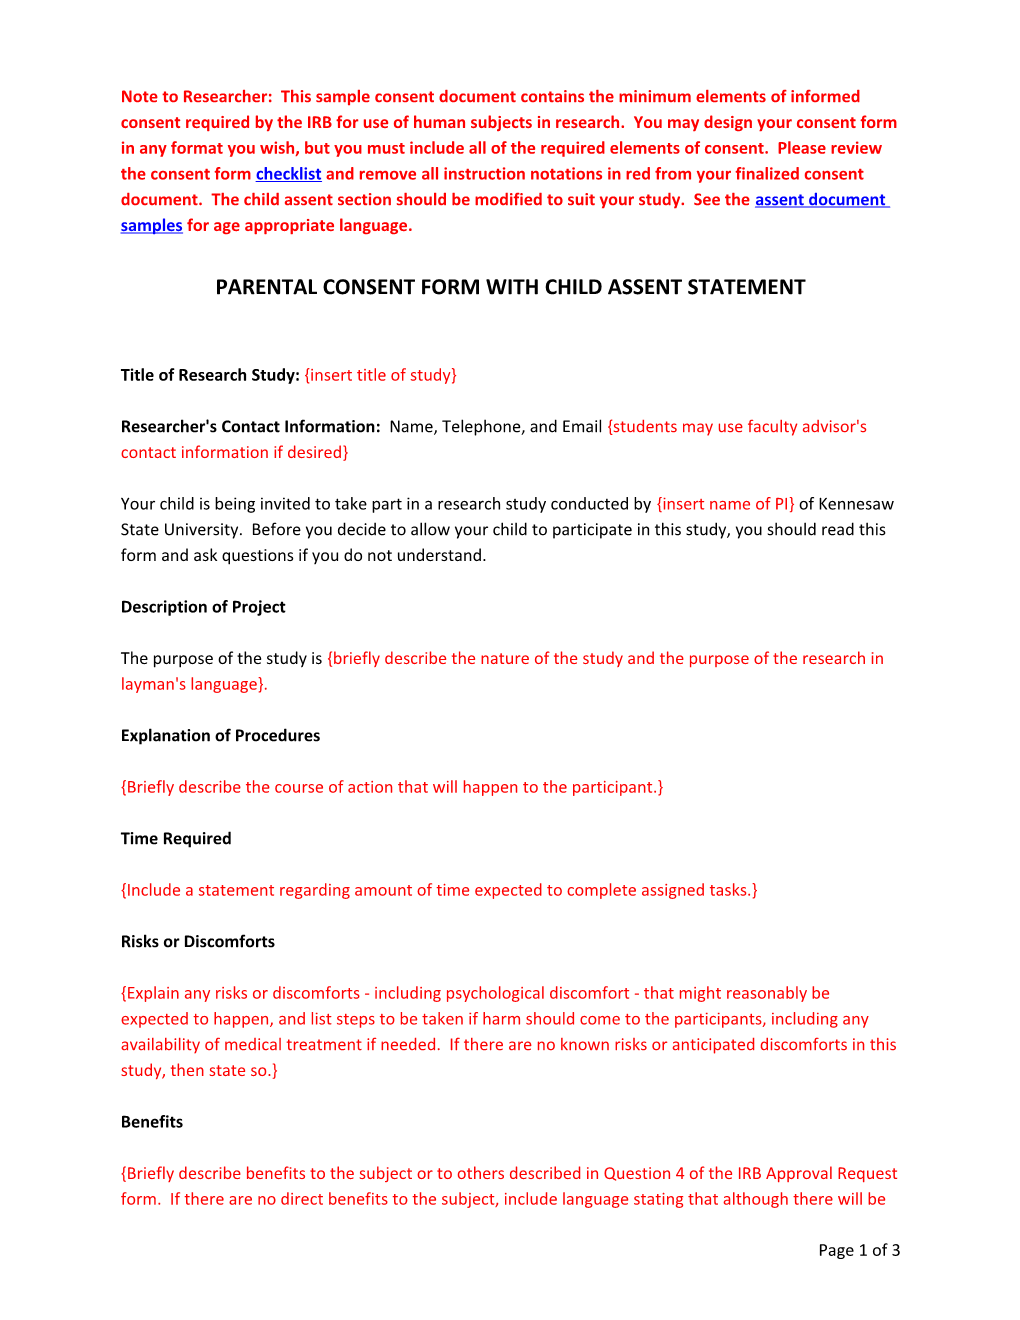 Parental Consent Form with Child Assent Statement